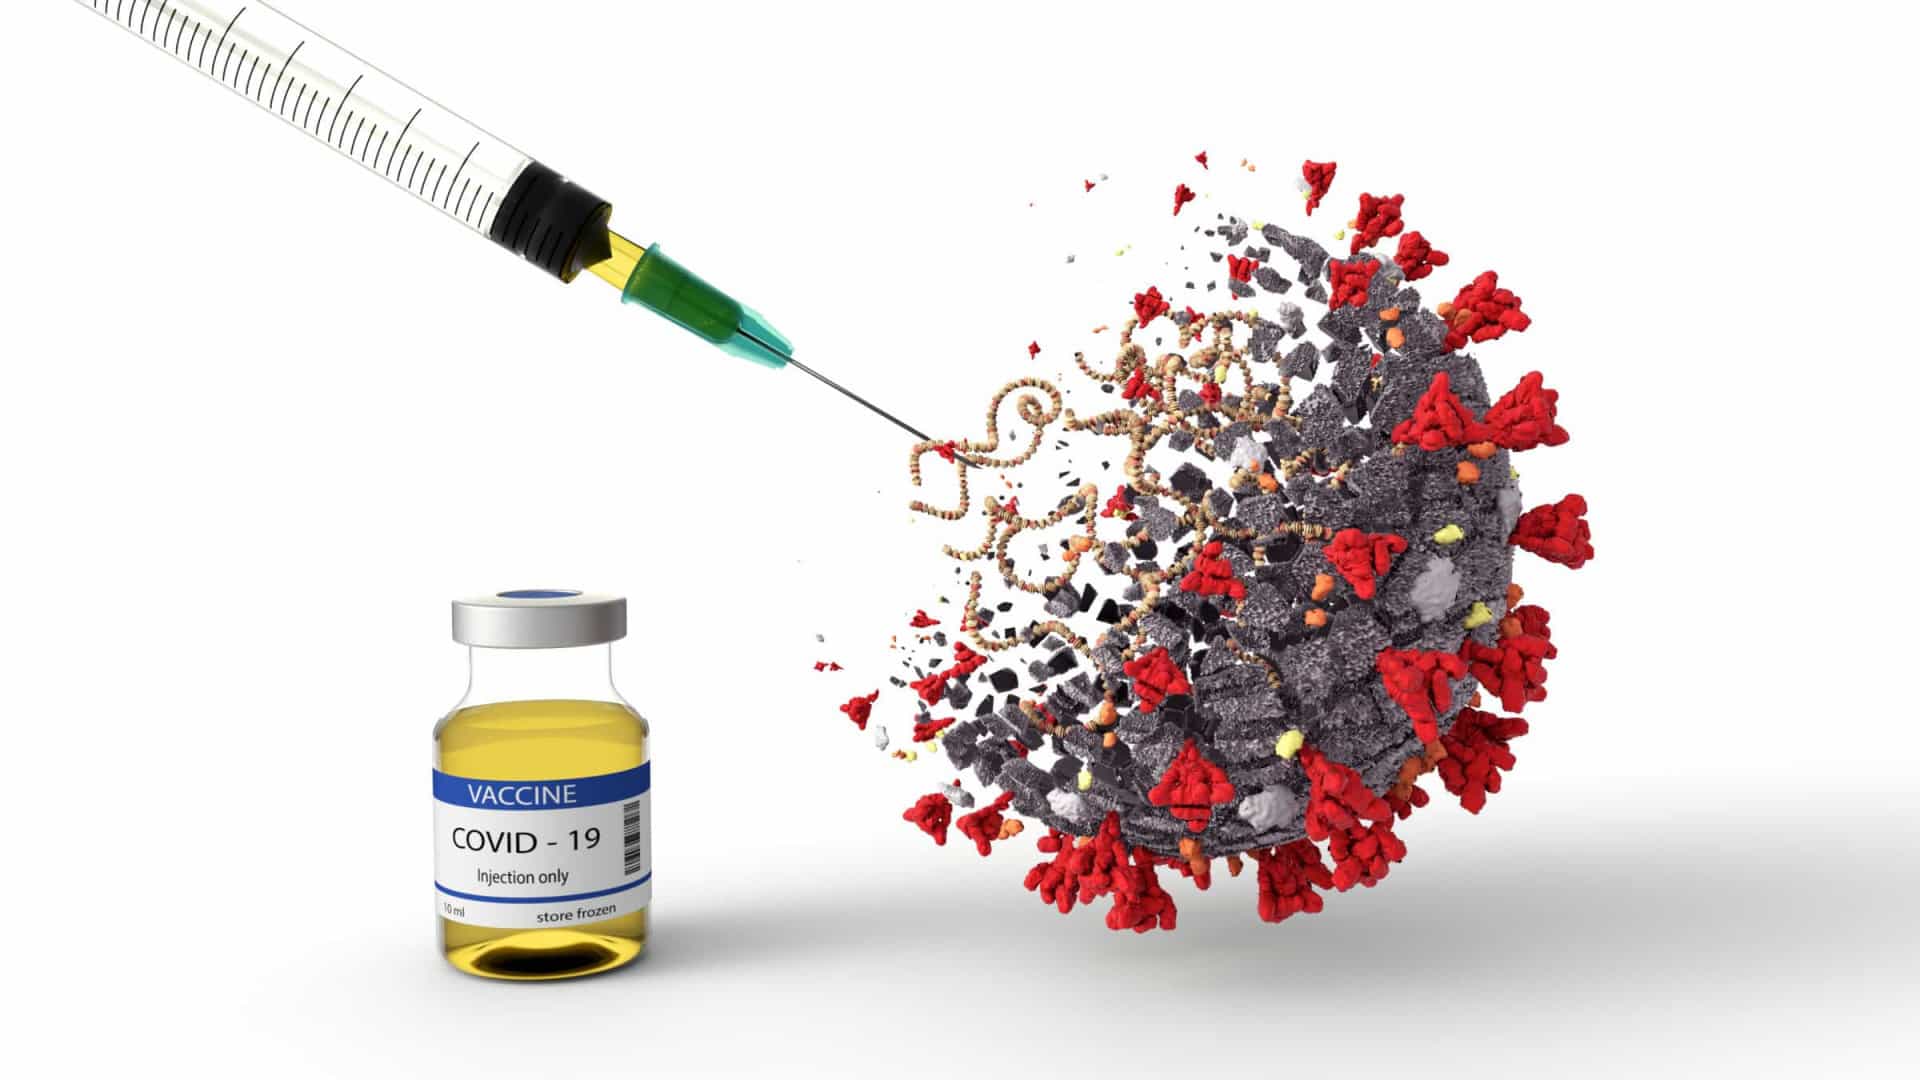 There are currently over one hundred projects underway to produce vaccines against Covid-19 in the world.